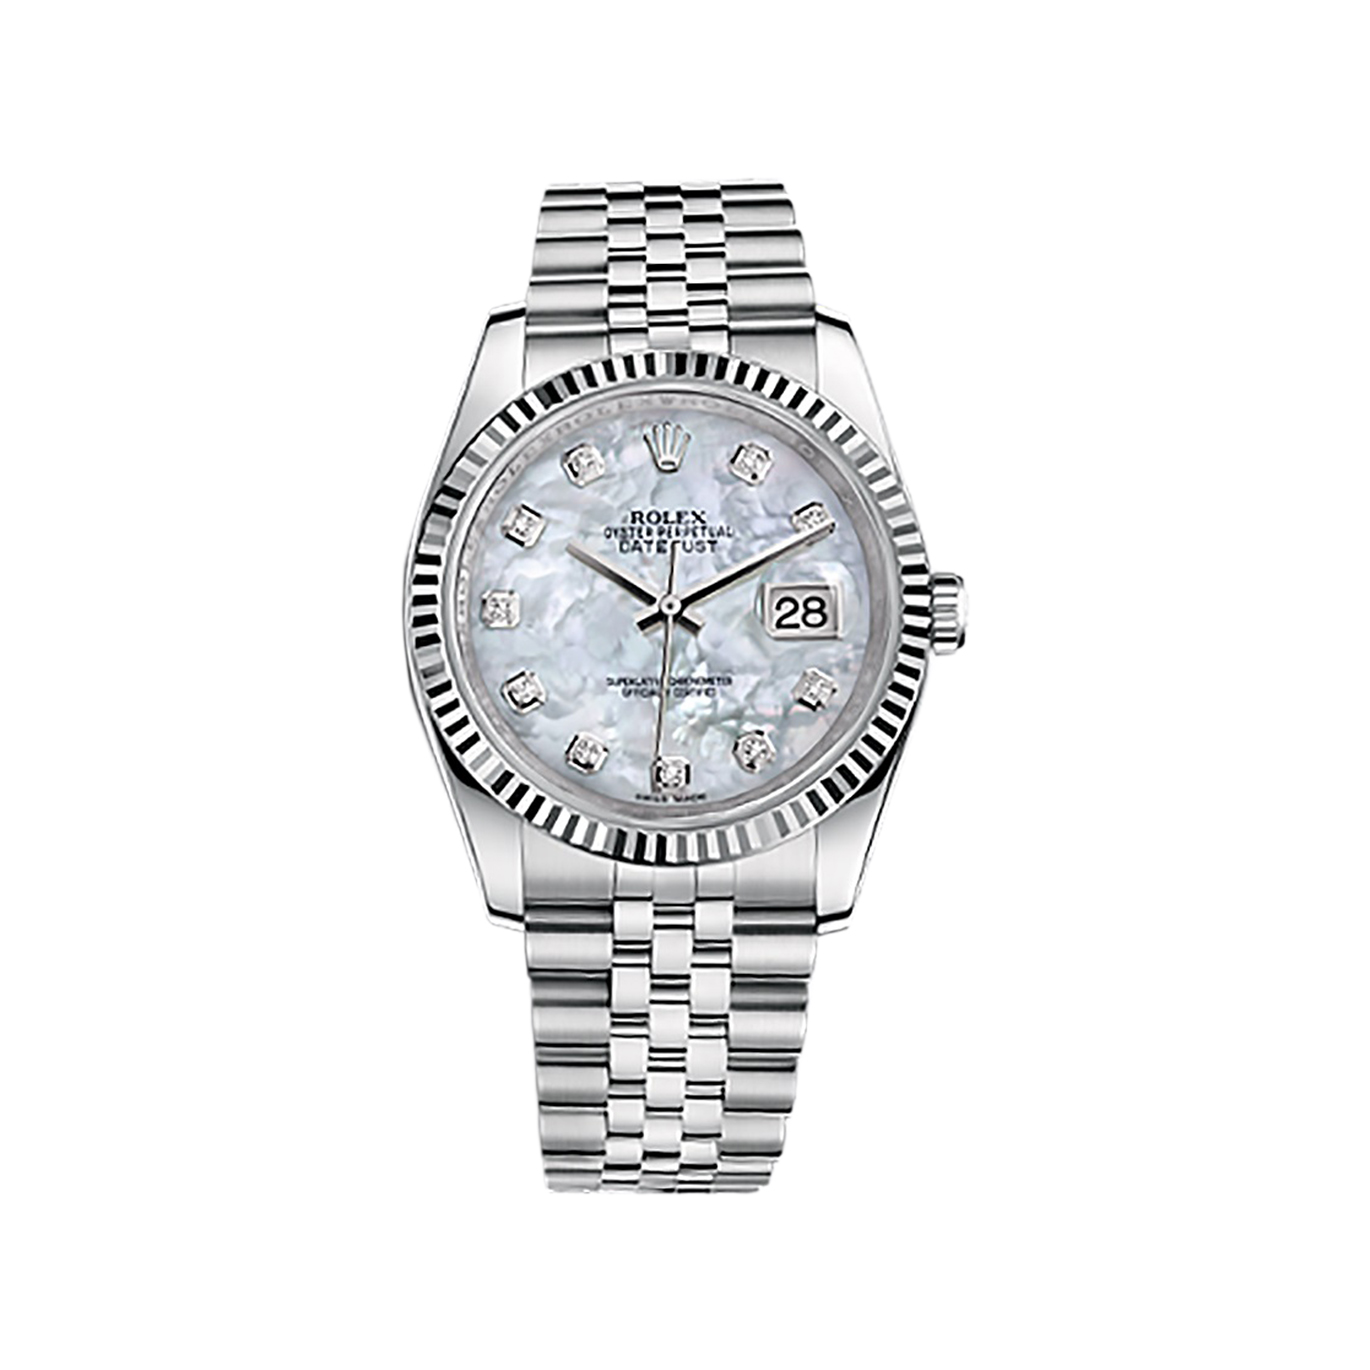 Datejust 36 116234 White Gold & Stainless Steel Watch (White Mother-of-Pearl Set with Diamonds)